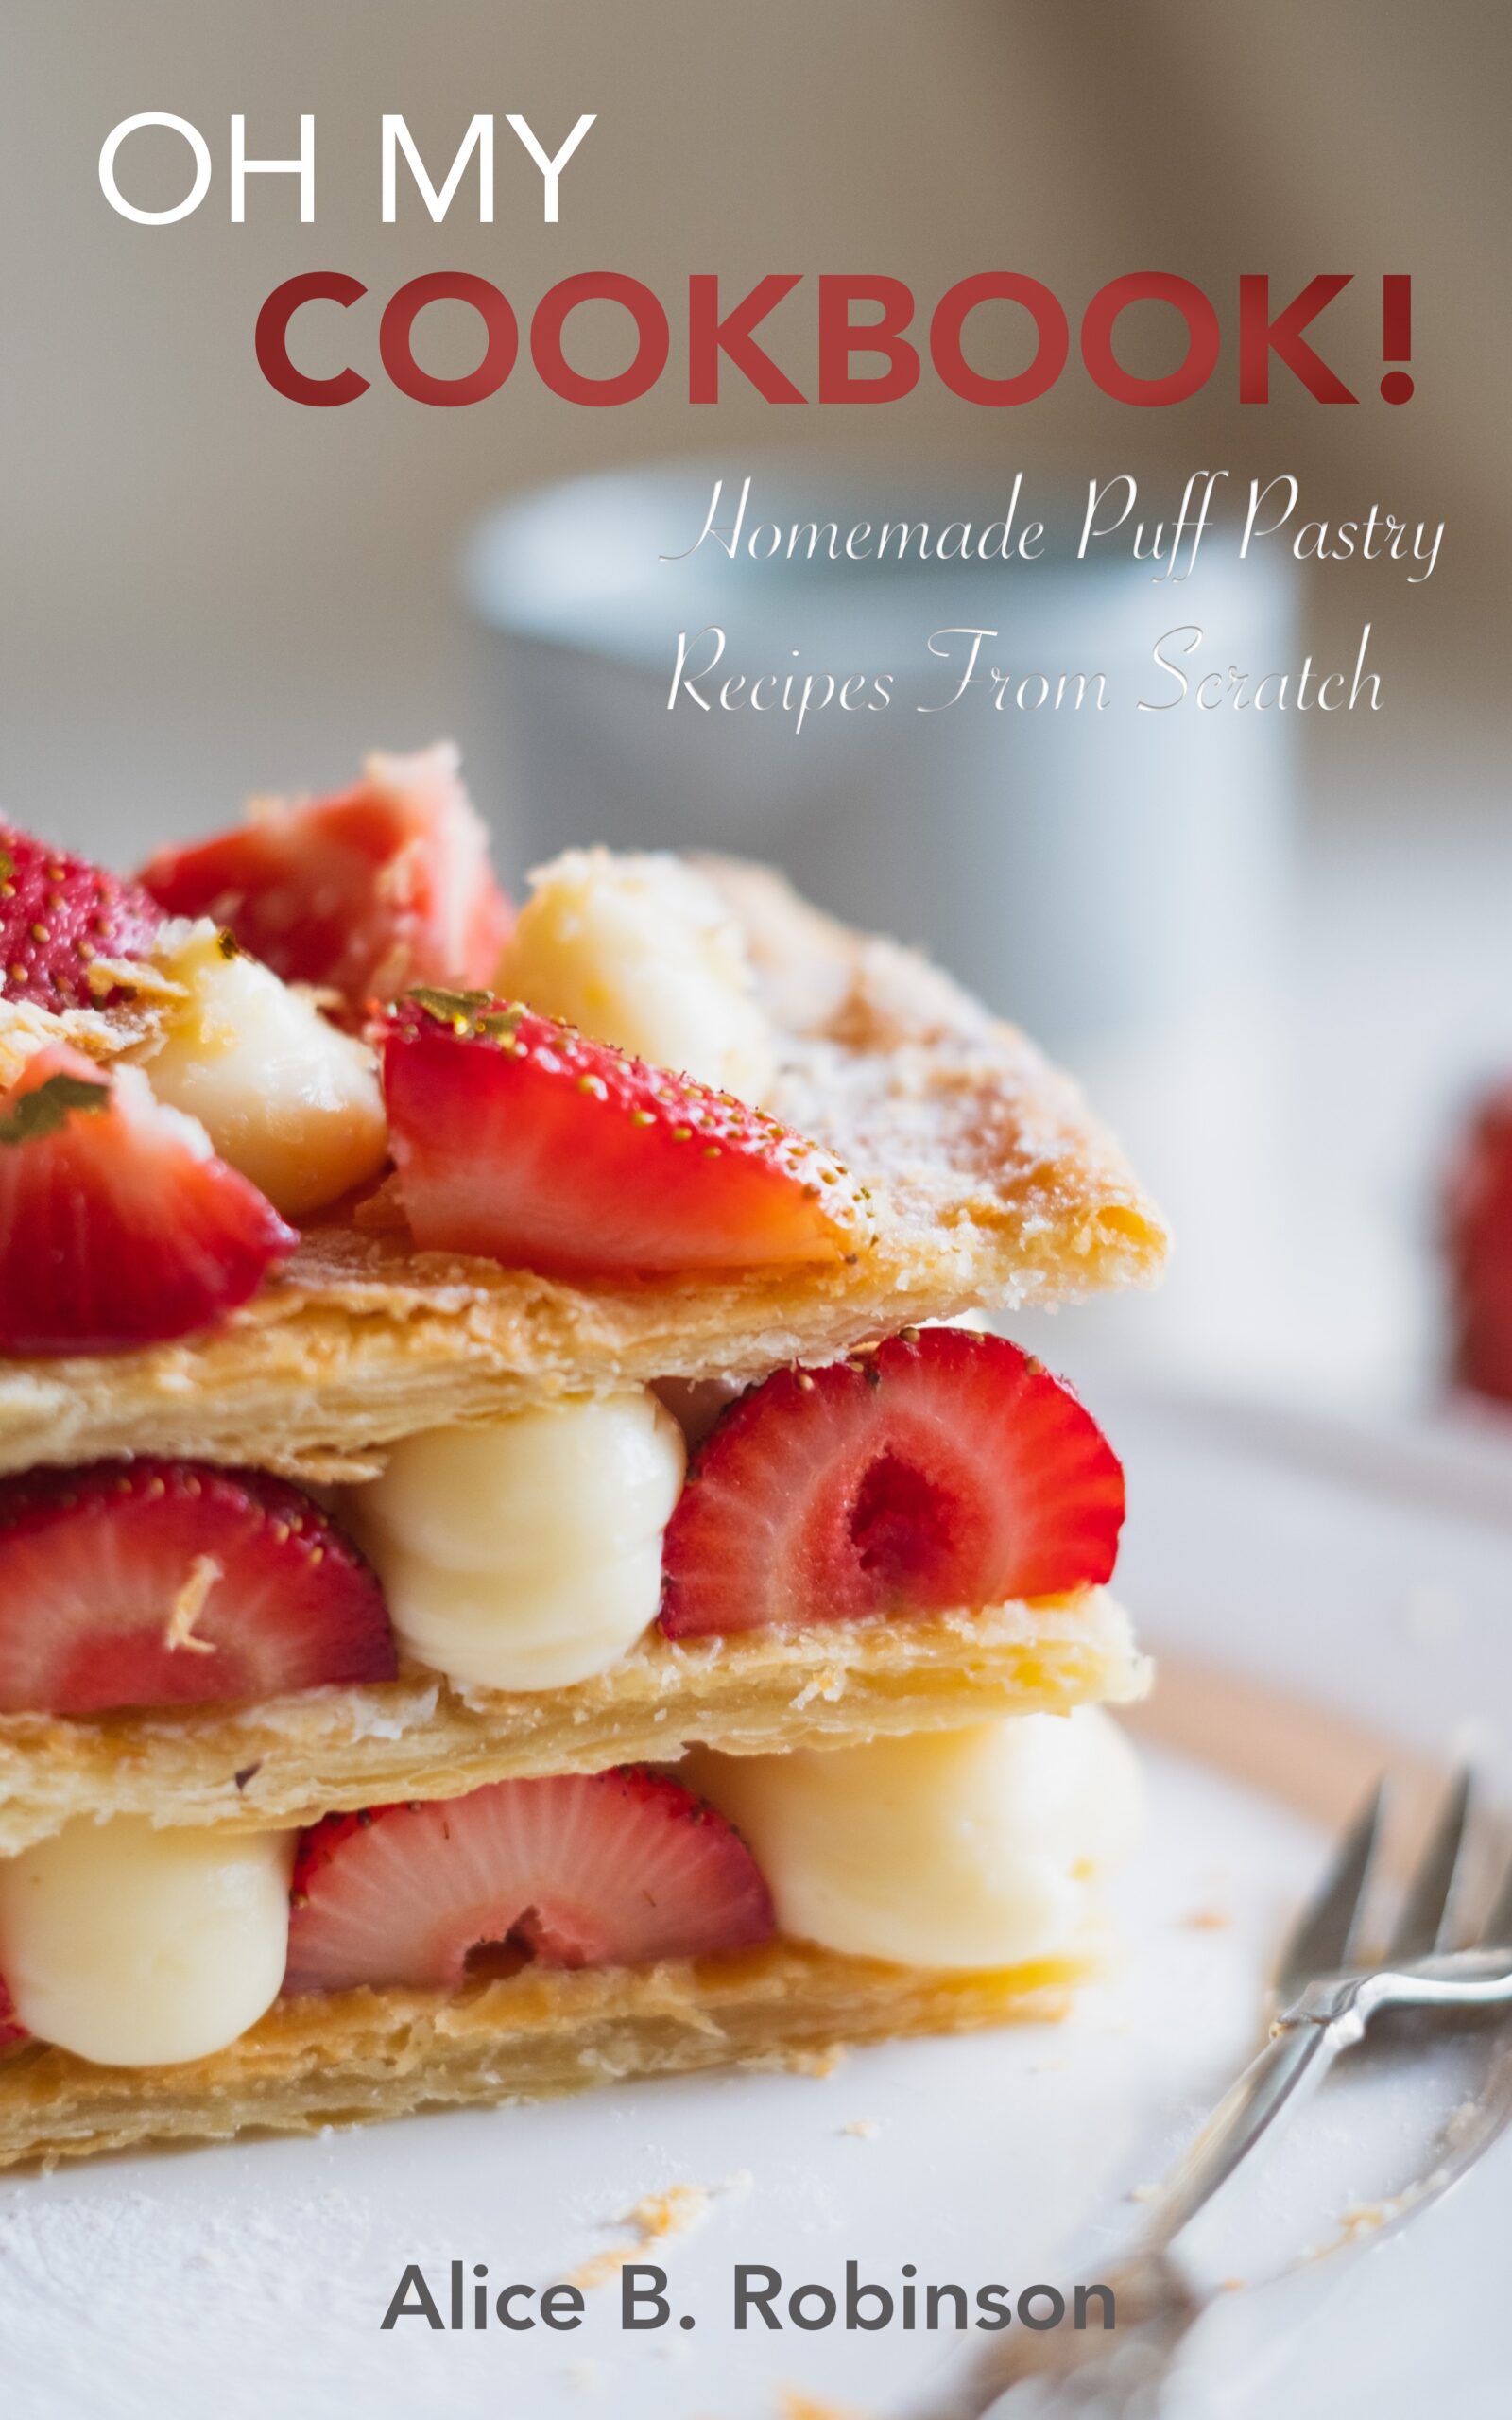 FREE: Oh My Cookbook! Homemade Puff Pastry Recipes From Scratch by Alice B. Robinson